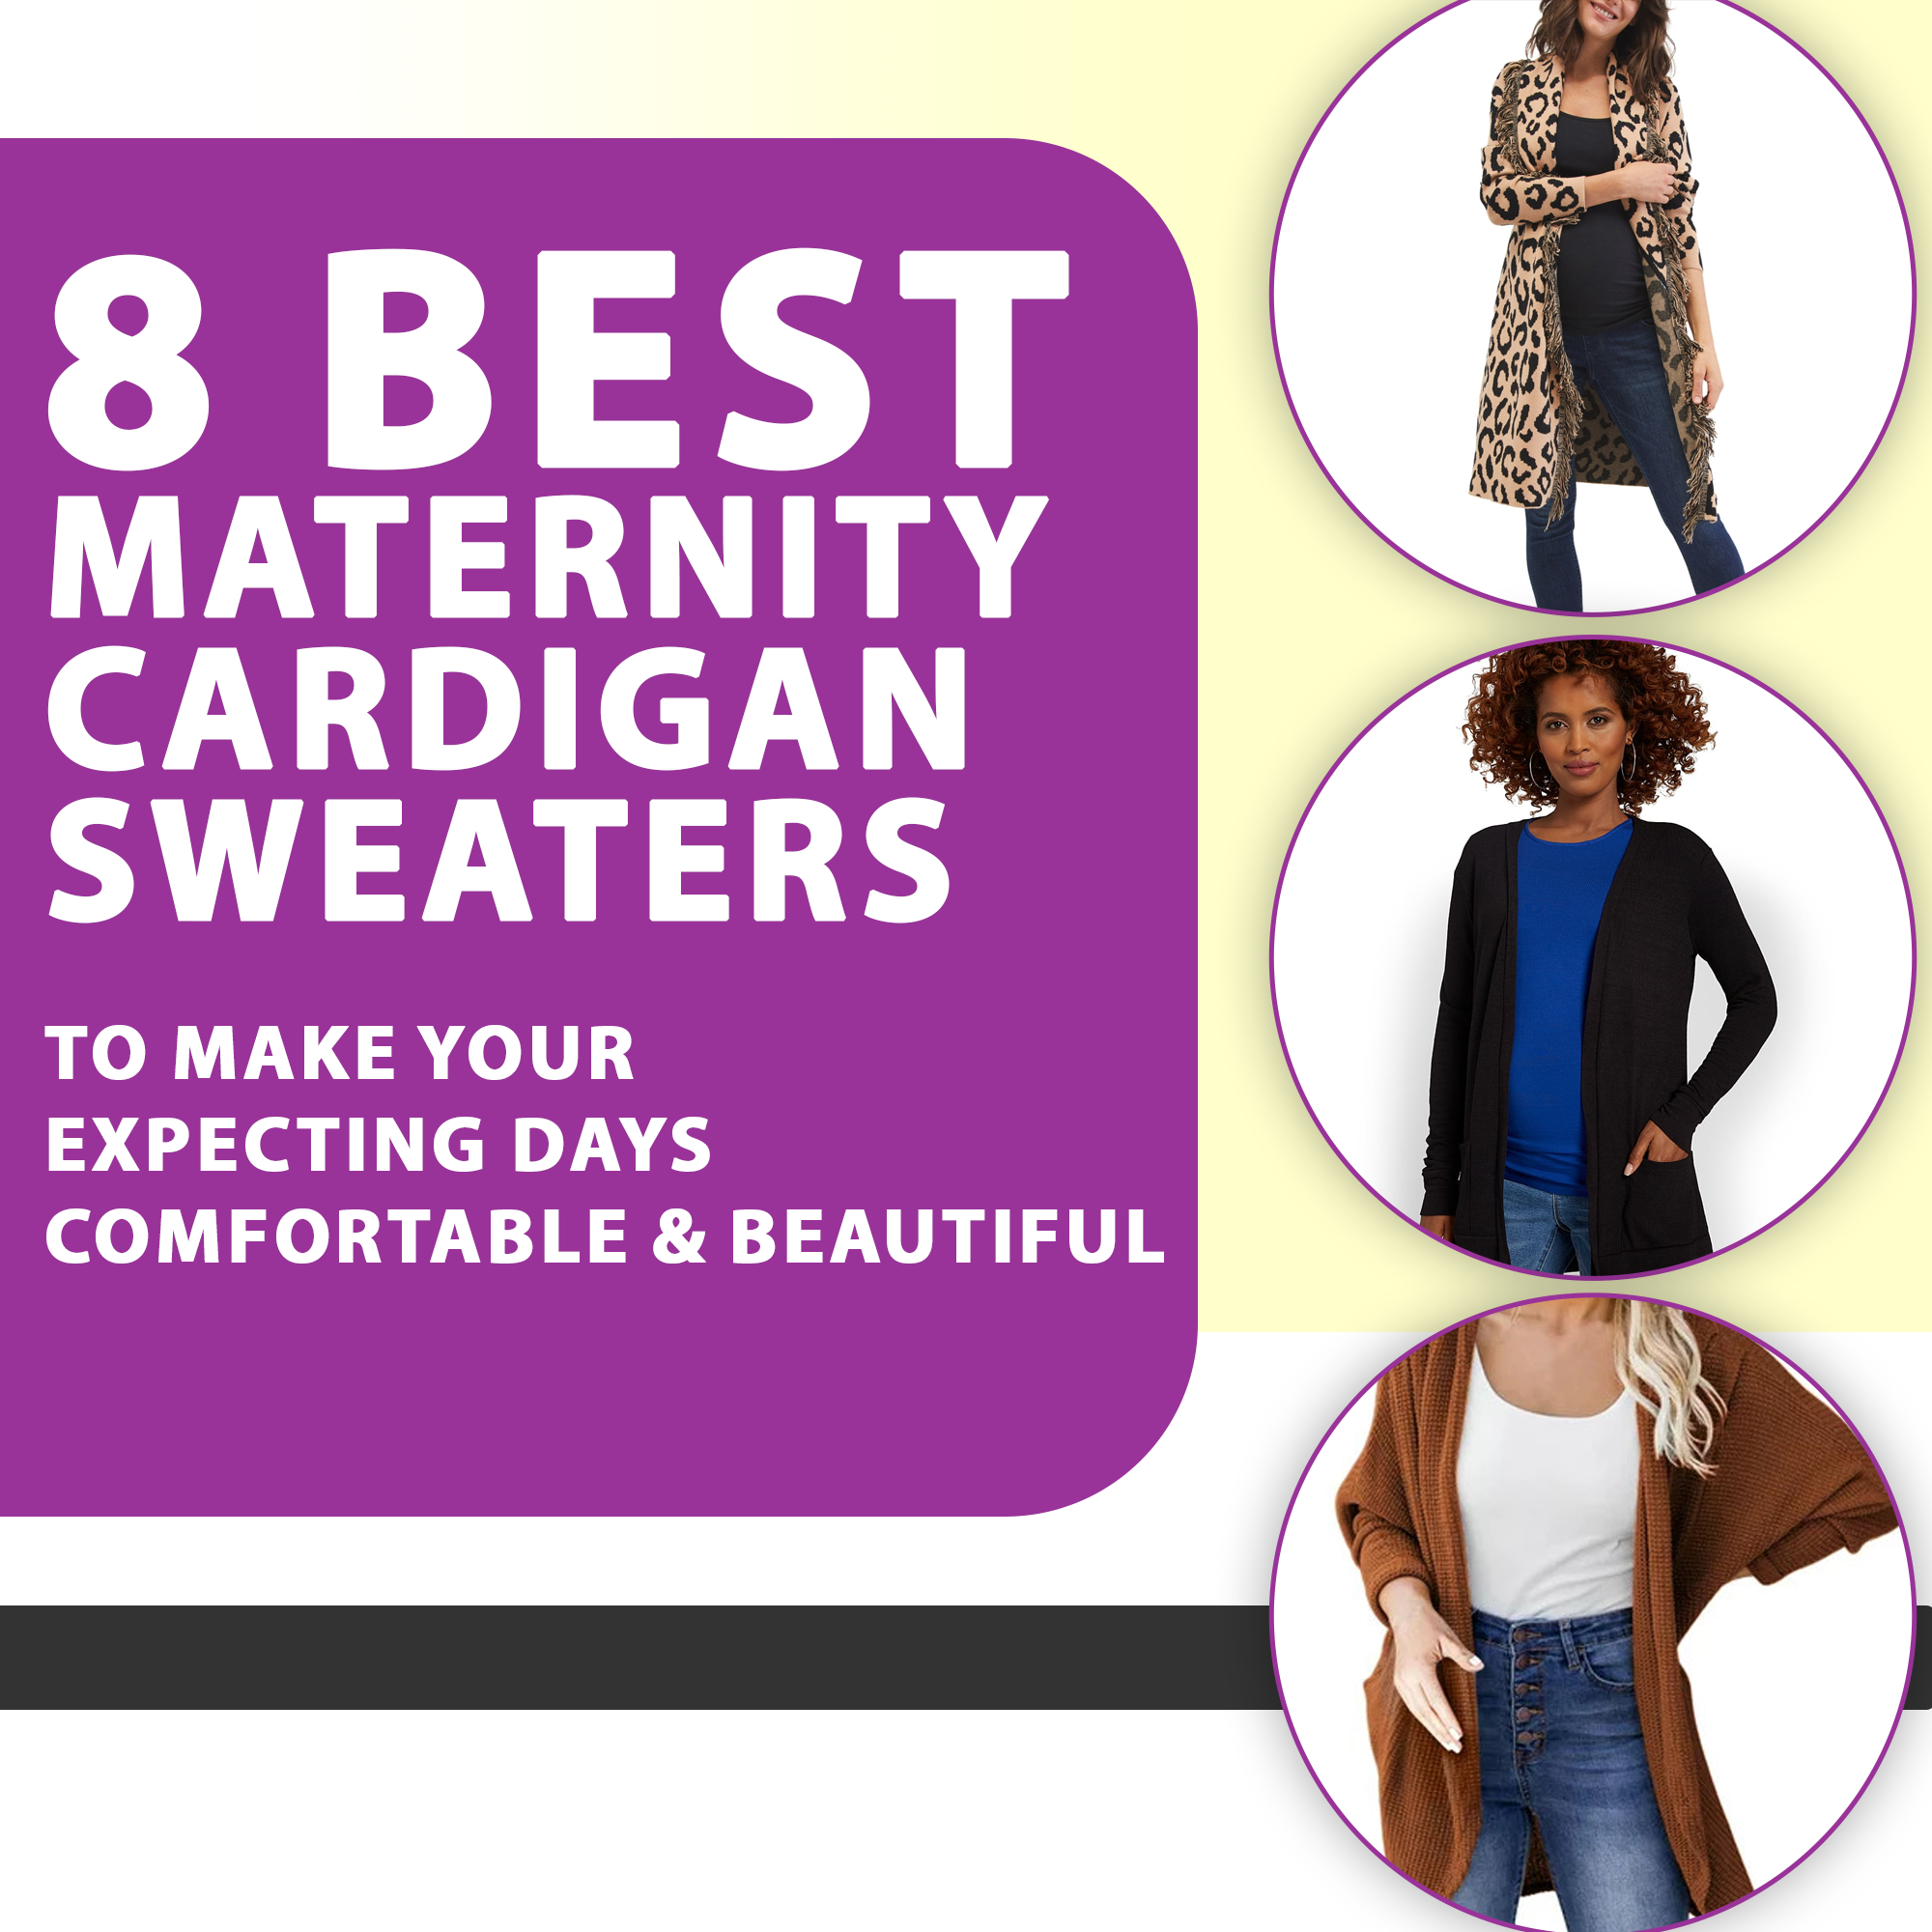 8 Best Maternity Cardigan Sweaters To Make Your Expecting Days Comfortable & Beautiful